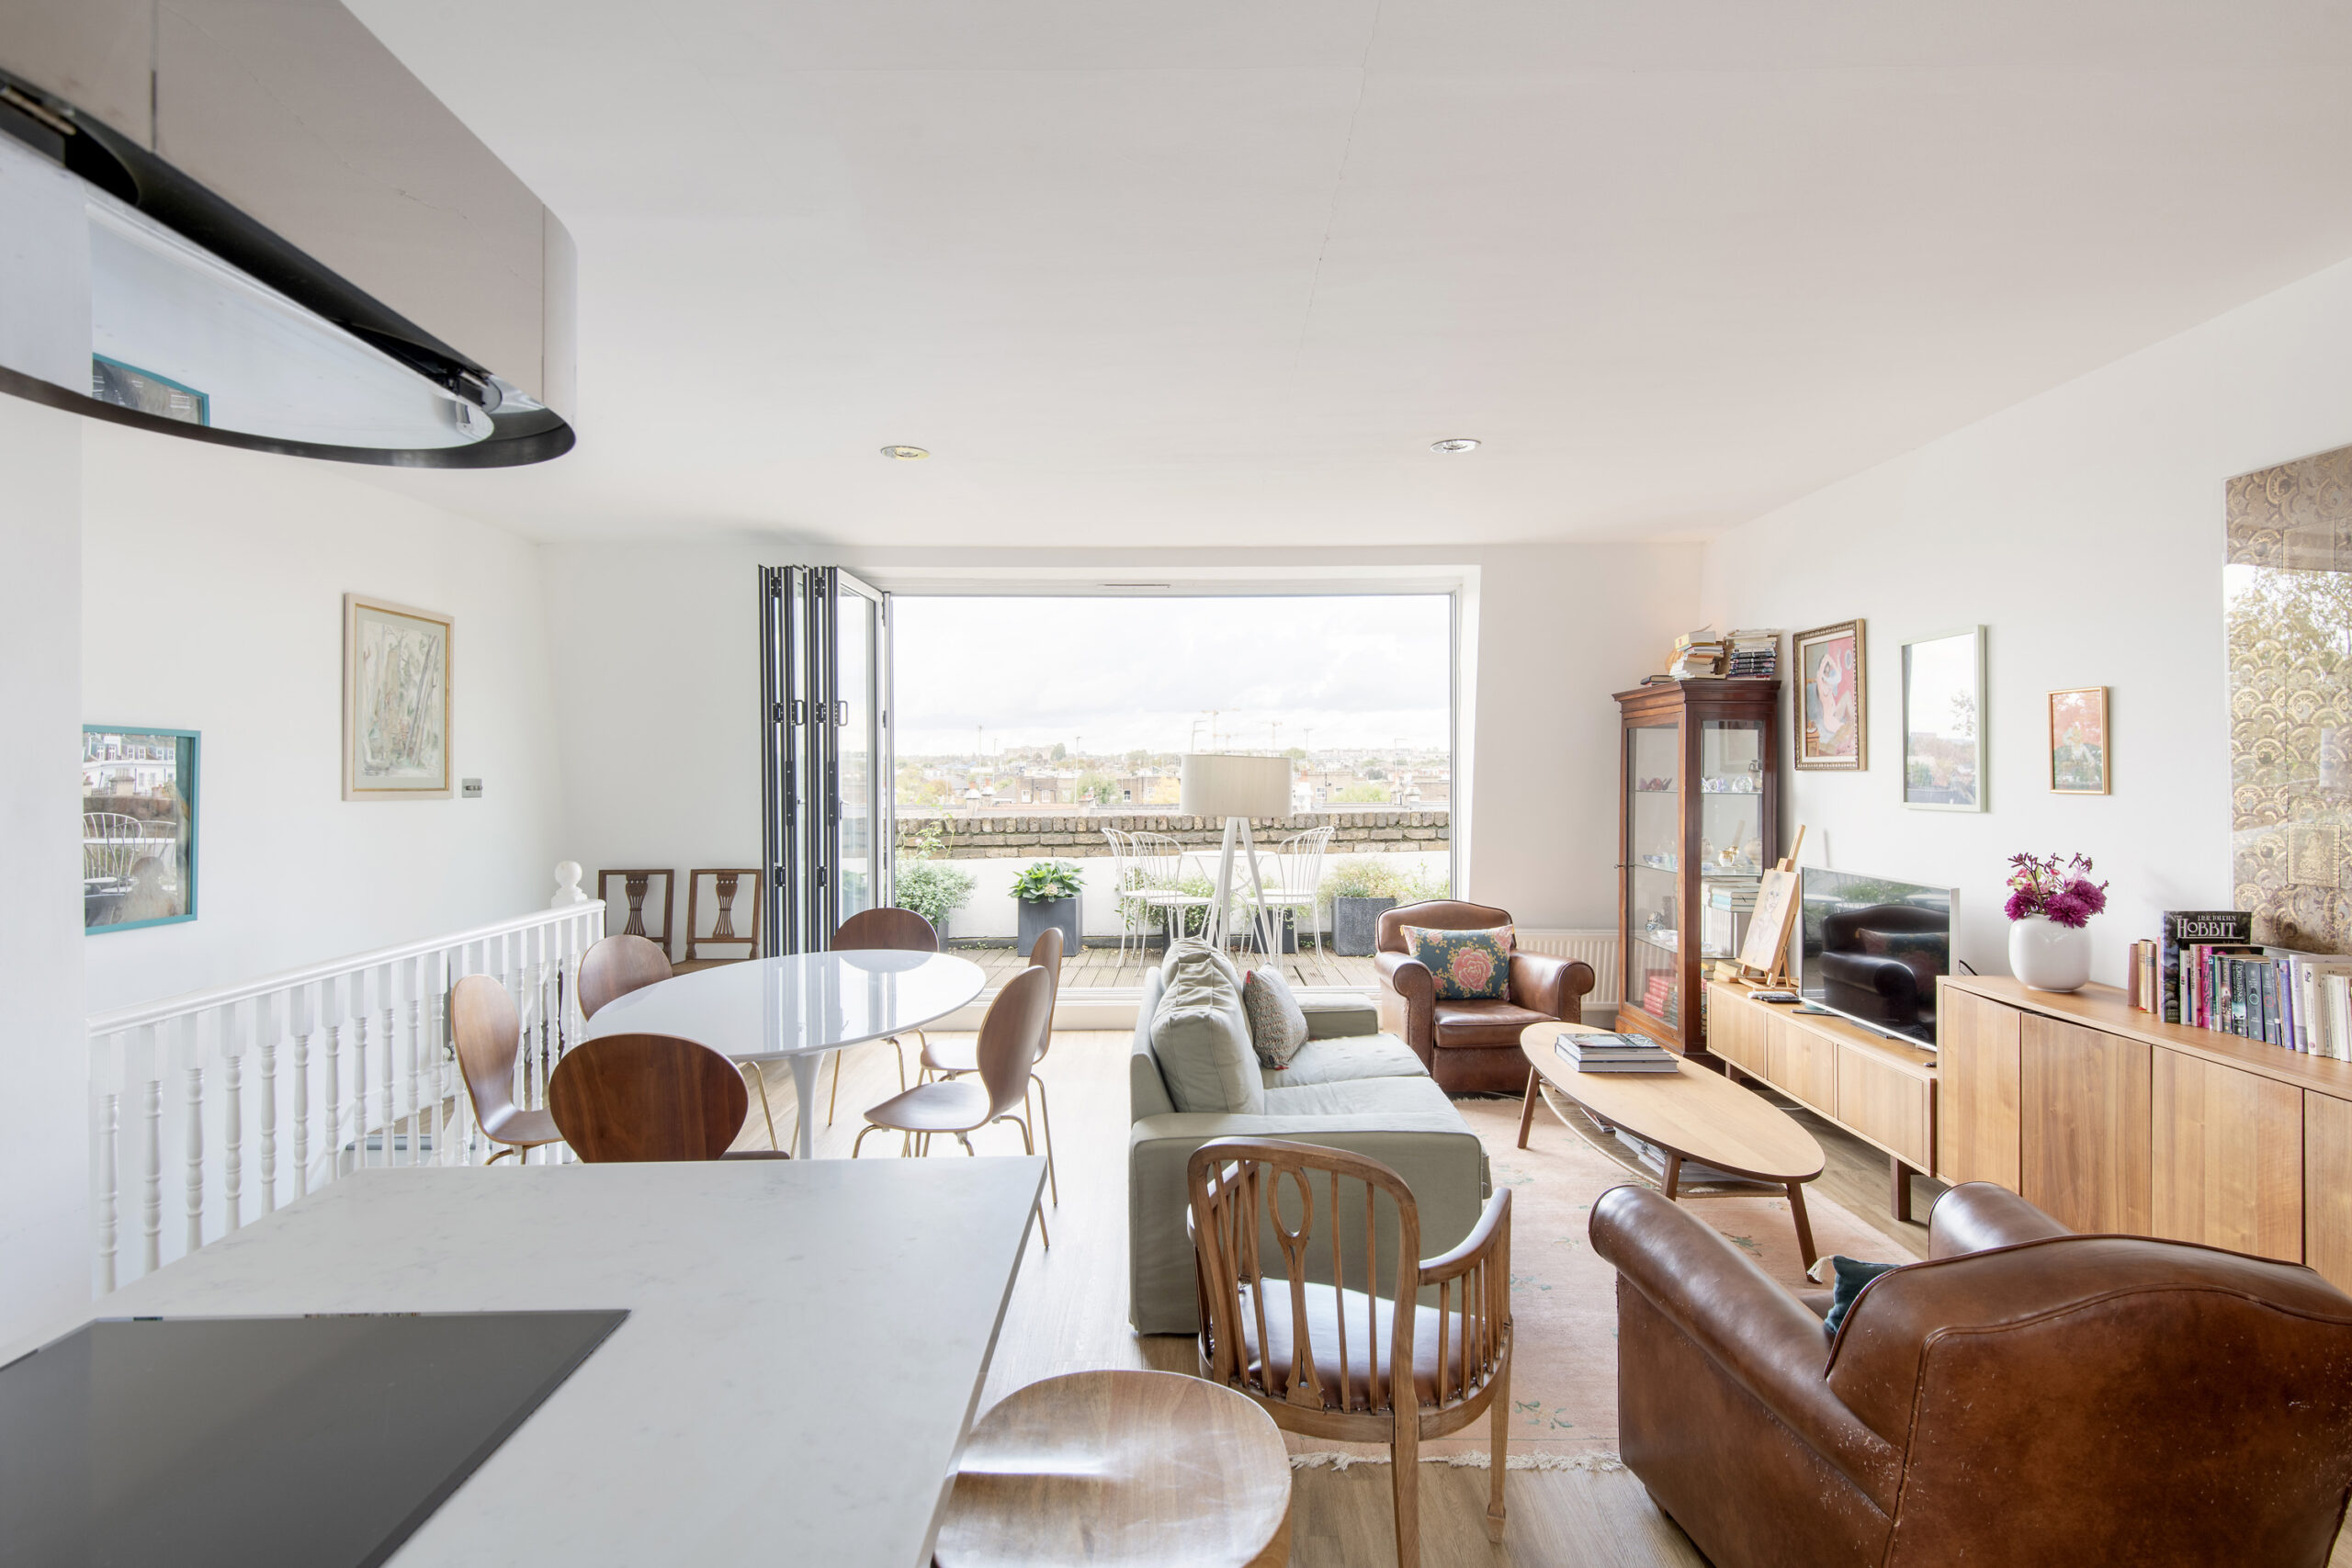 Luxury open-plan kitchen, dining and living room of a three-bedroom duplex for sale in Notting Hill